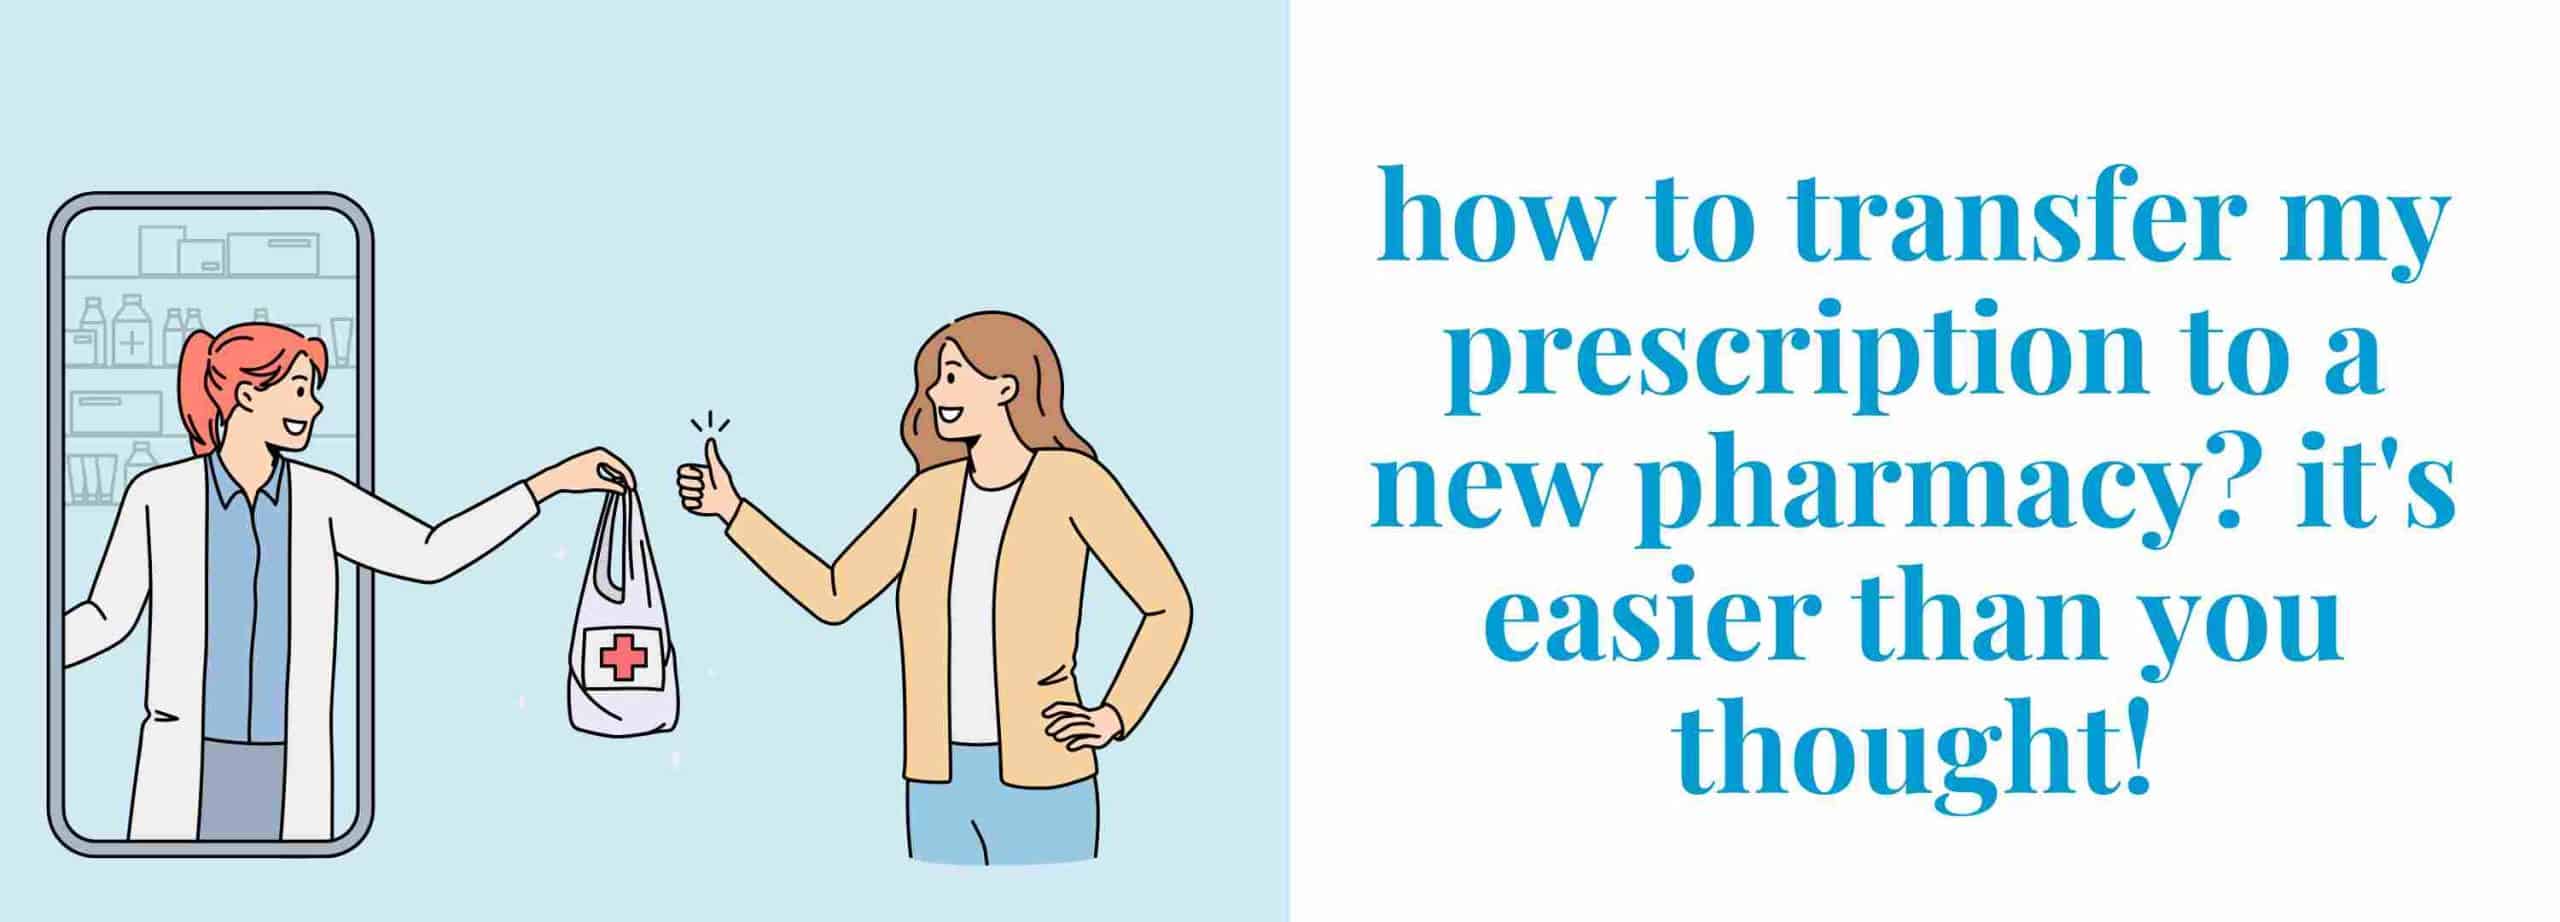 How to transfer my prescription to a new pharmacy? It's easier than you thought!